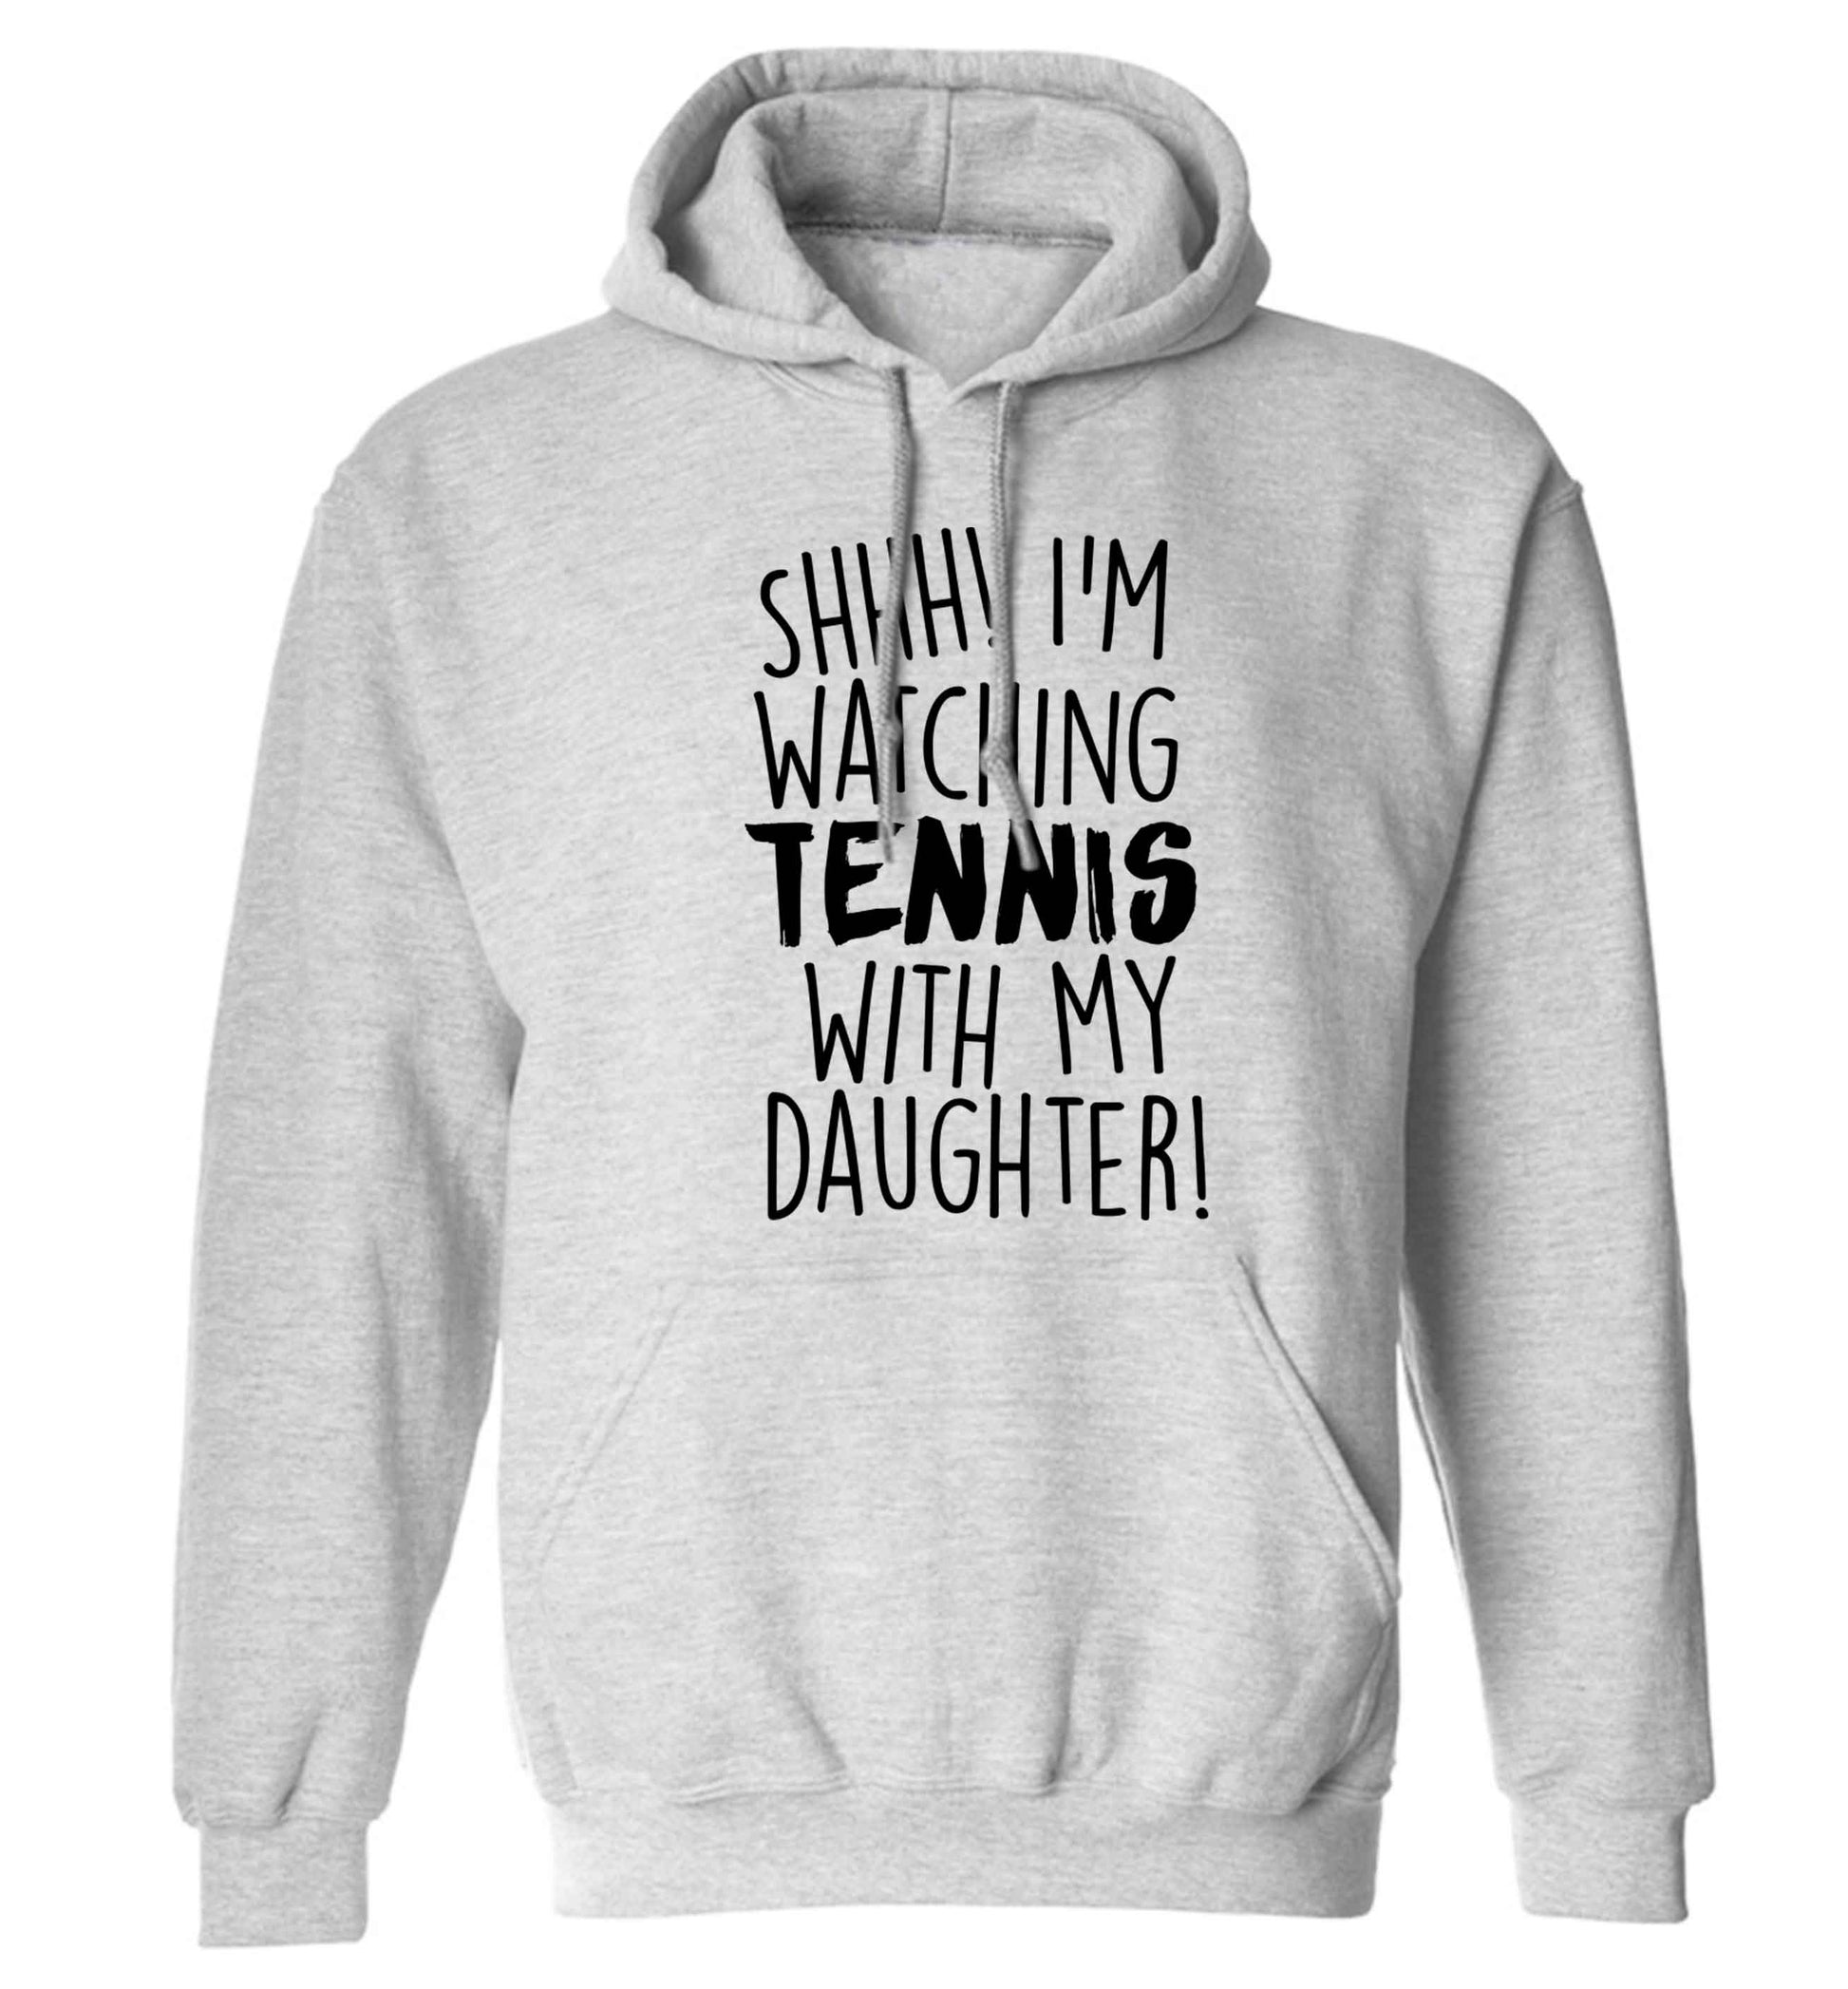 Shh! I'm watching tennis with my daughter! adults unisex grey hoodie 2XL